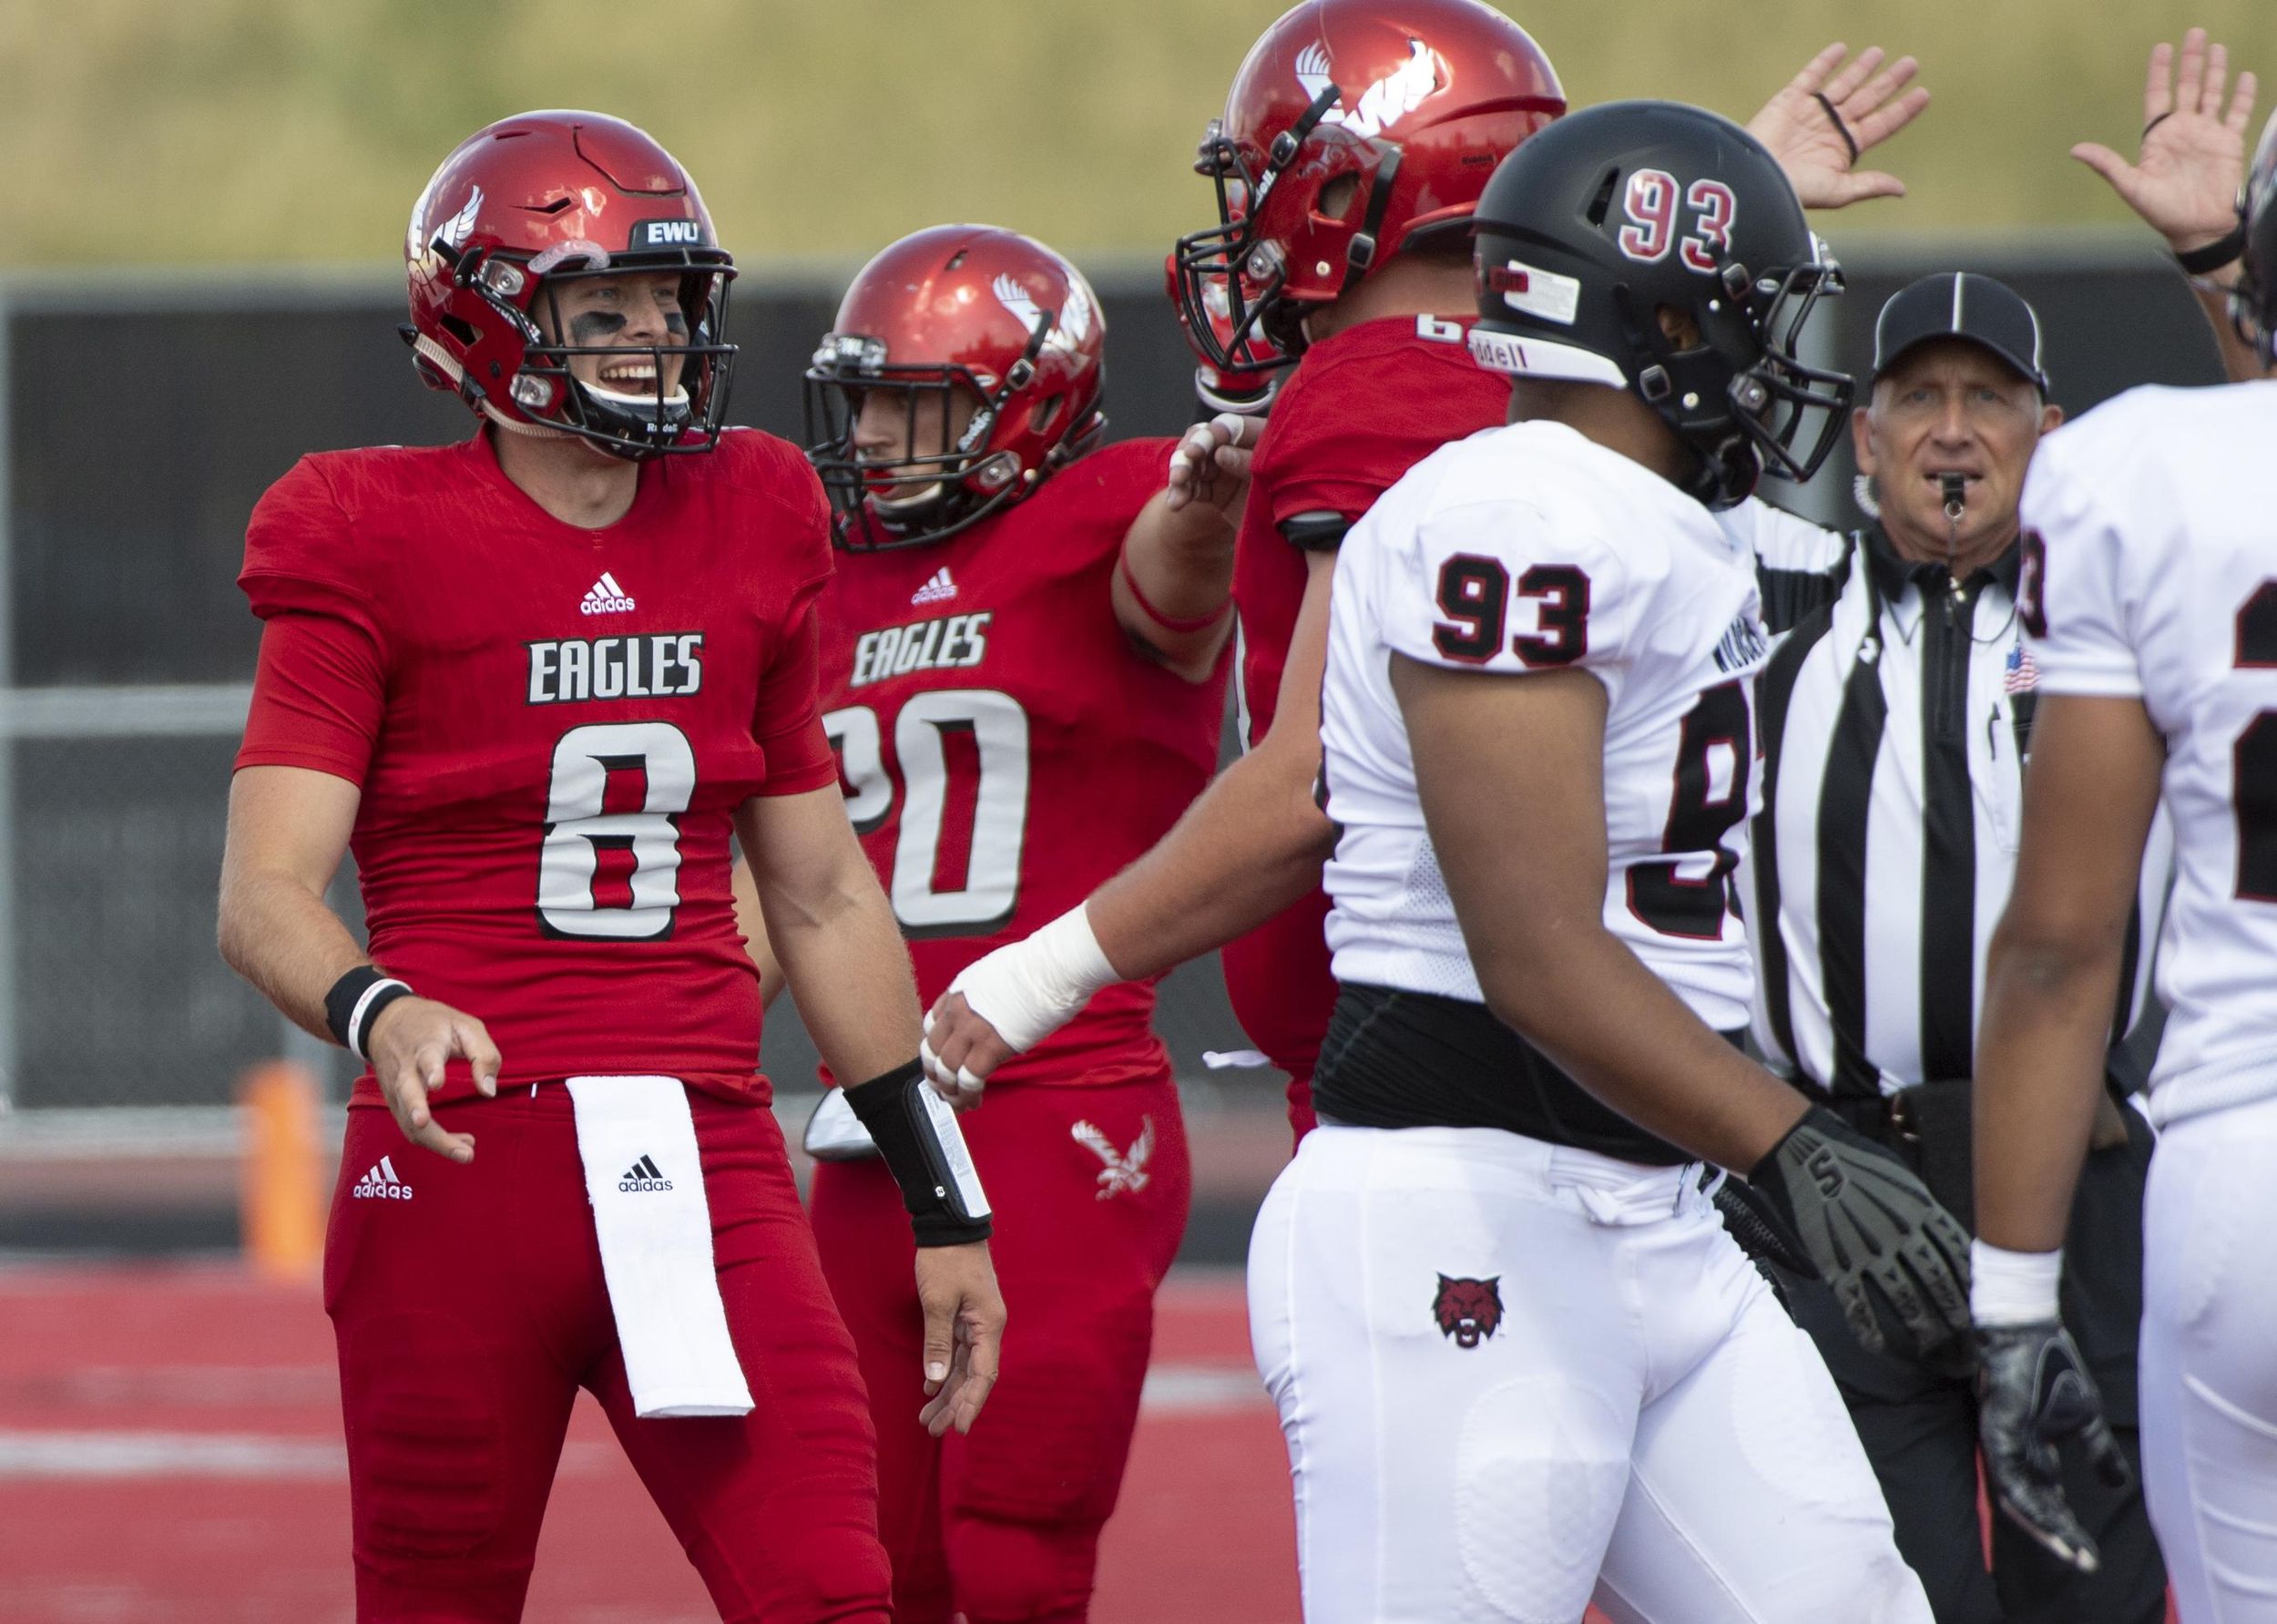 Eastern Washington offense totals 677 yards as Eagles rout Central